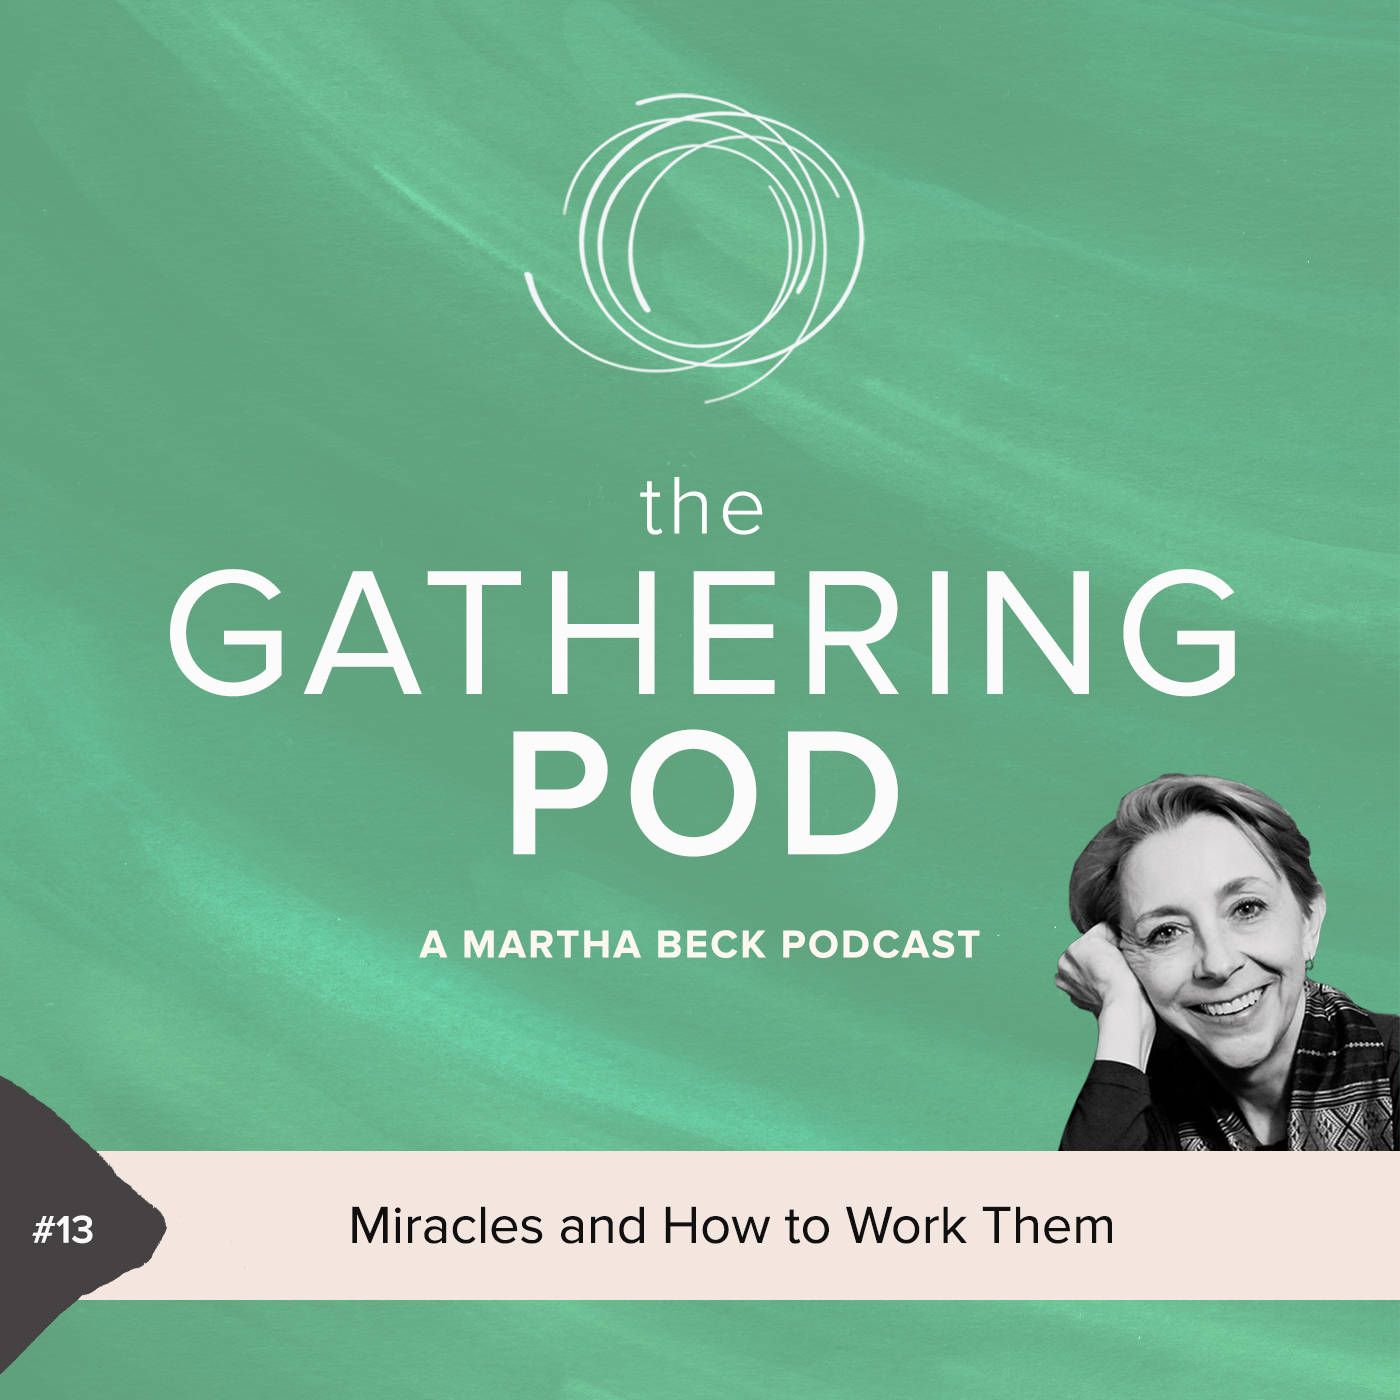 Image for The Gathering Pod A Martha Beck Podcast Episode #13 Miracles and How to Work Them